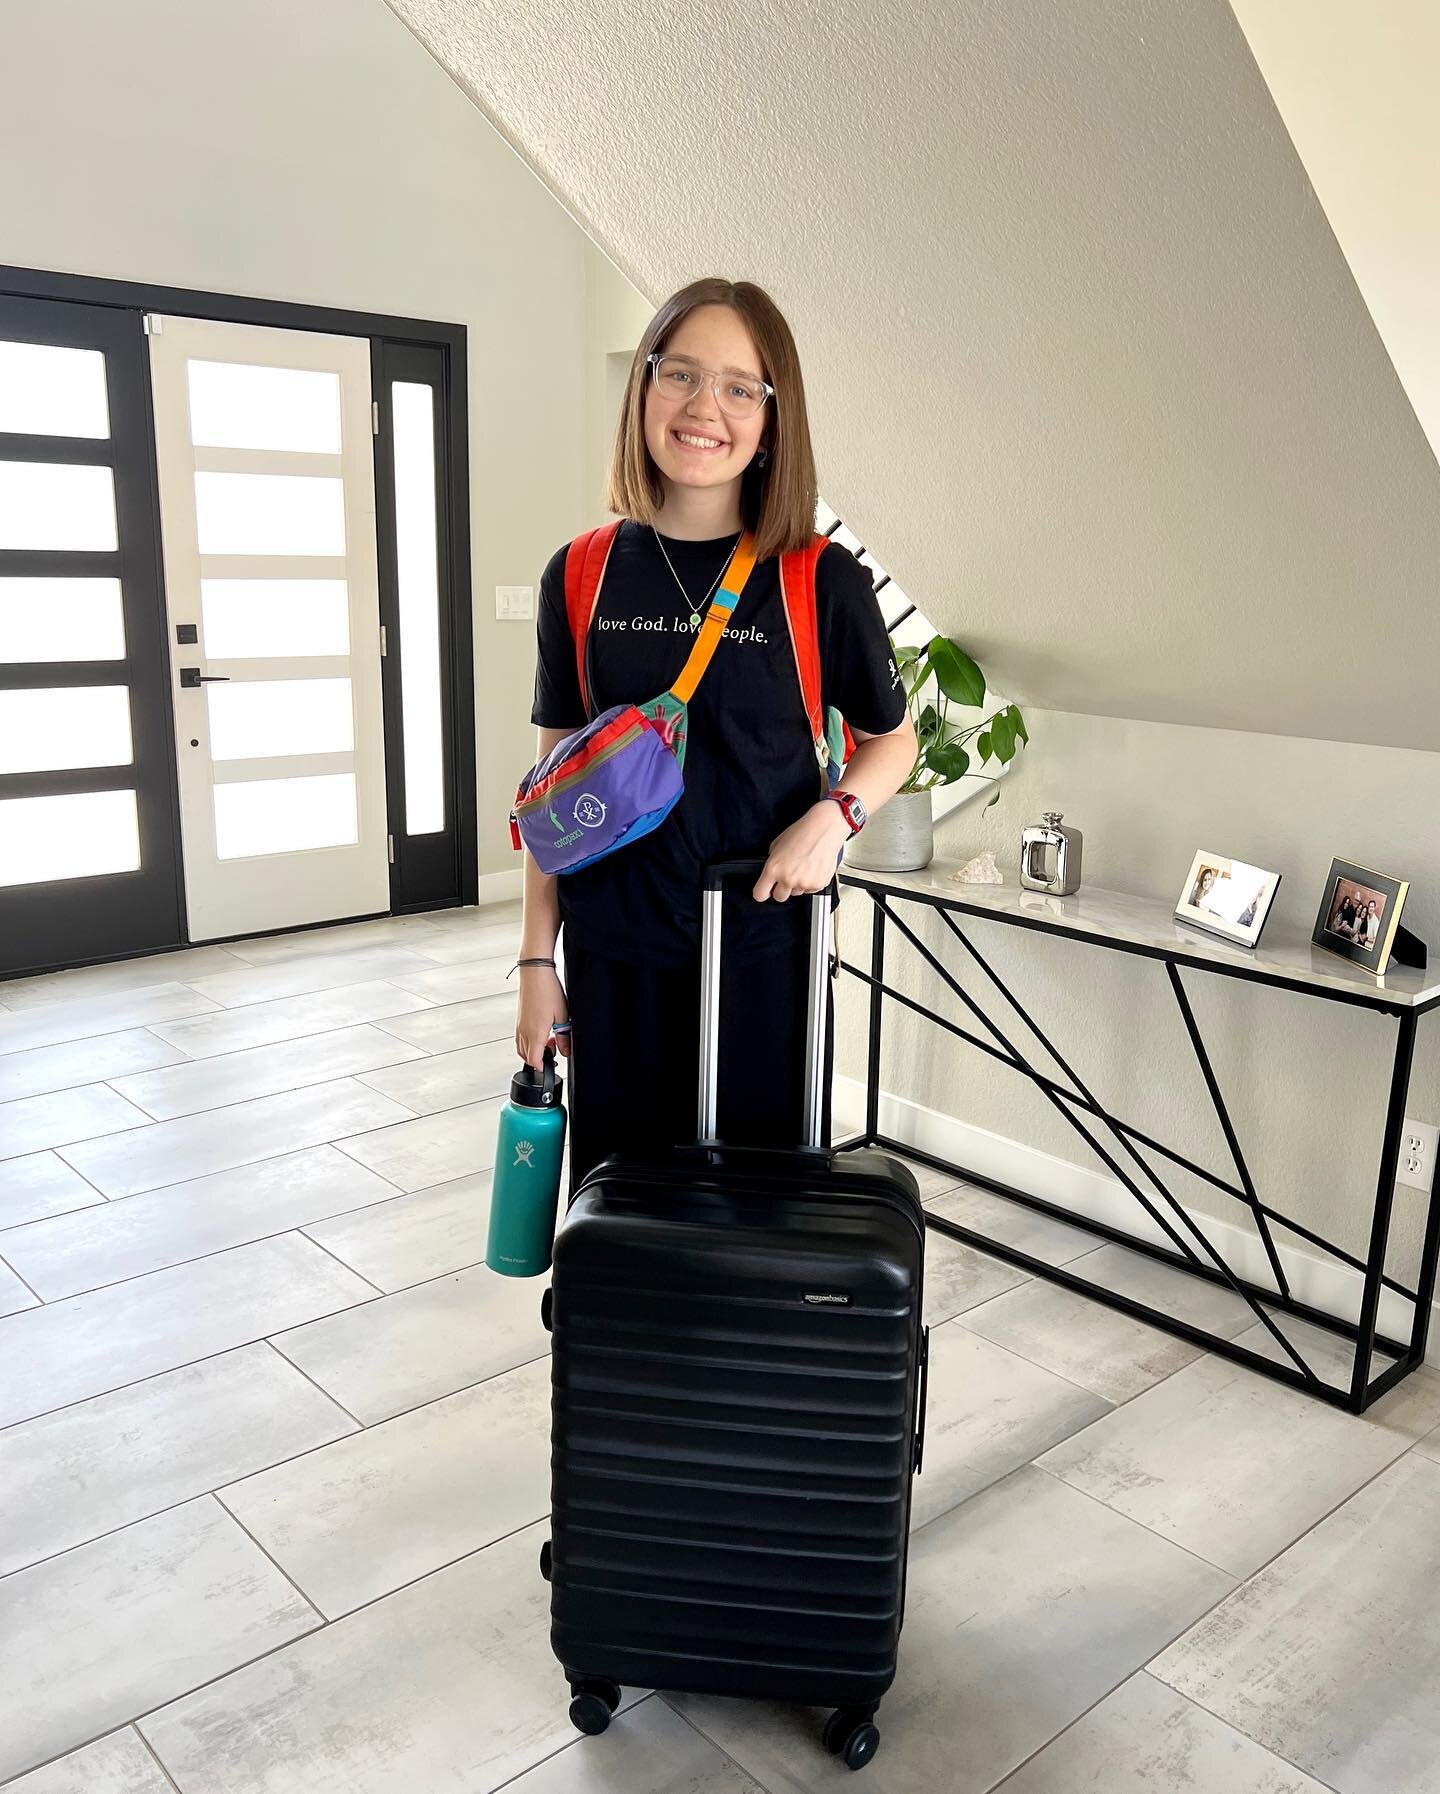 Your trip plans are finalized but what final things should you do the day before you head out on vacation?🤔 

Here are a few things that I like to do before heading out on vacations:
⭐️ If your kids will be missing school, finalize plans with their 